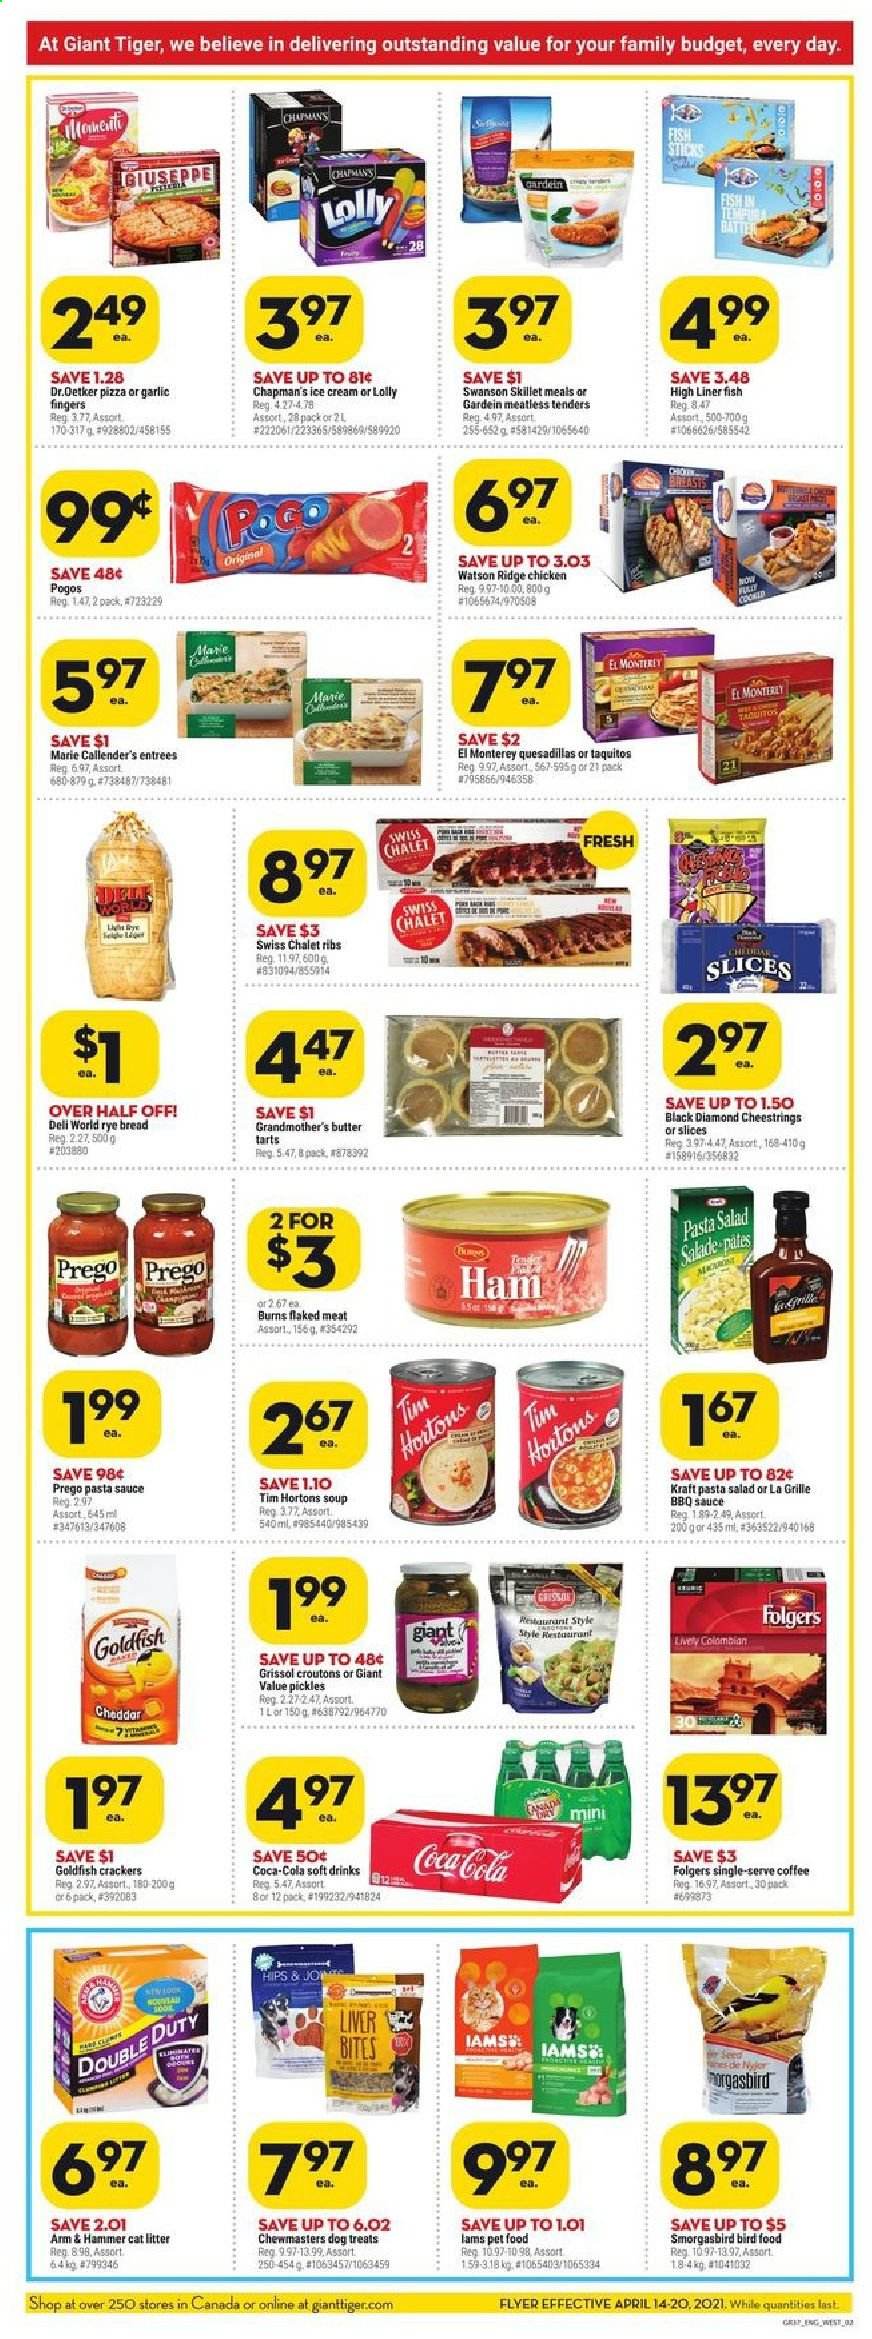 thumbnail - Giant Tiger Flyer - April 14, 2021 - April 20, 2021 - Sales products - bread, fish, fish fingers, fish sticks, pizza, pasta sauce, soup, sauce, Marie Callender's, taquitos, Kraft®, ham, pasta salad, string cheese, Dr. Oetker, butter, ice cream, crackers, lollipop, Goldfish, ARM & HAMMER, croutons, pickles, BBQ sauce, Coca-Cola, soft drink, coffee, Folgers, cat litter, animal food, Iams. Page 2.